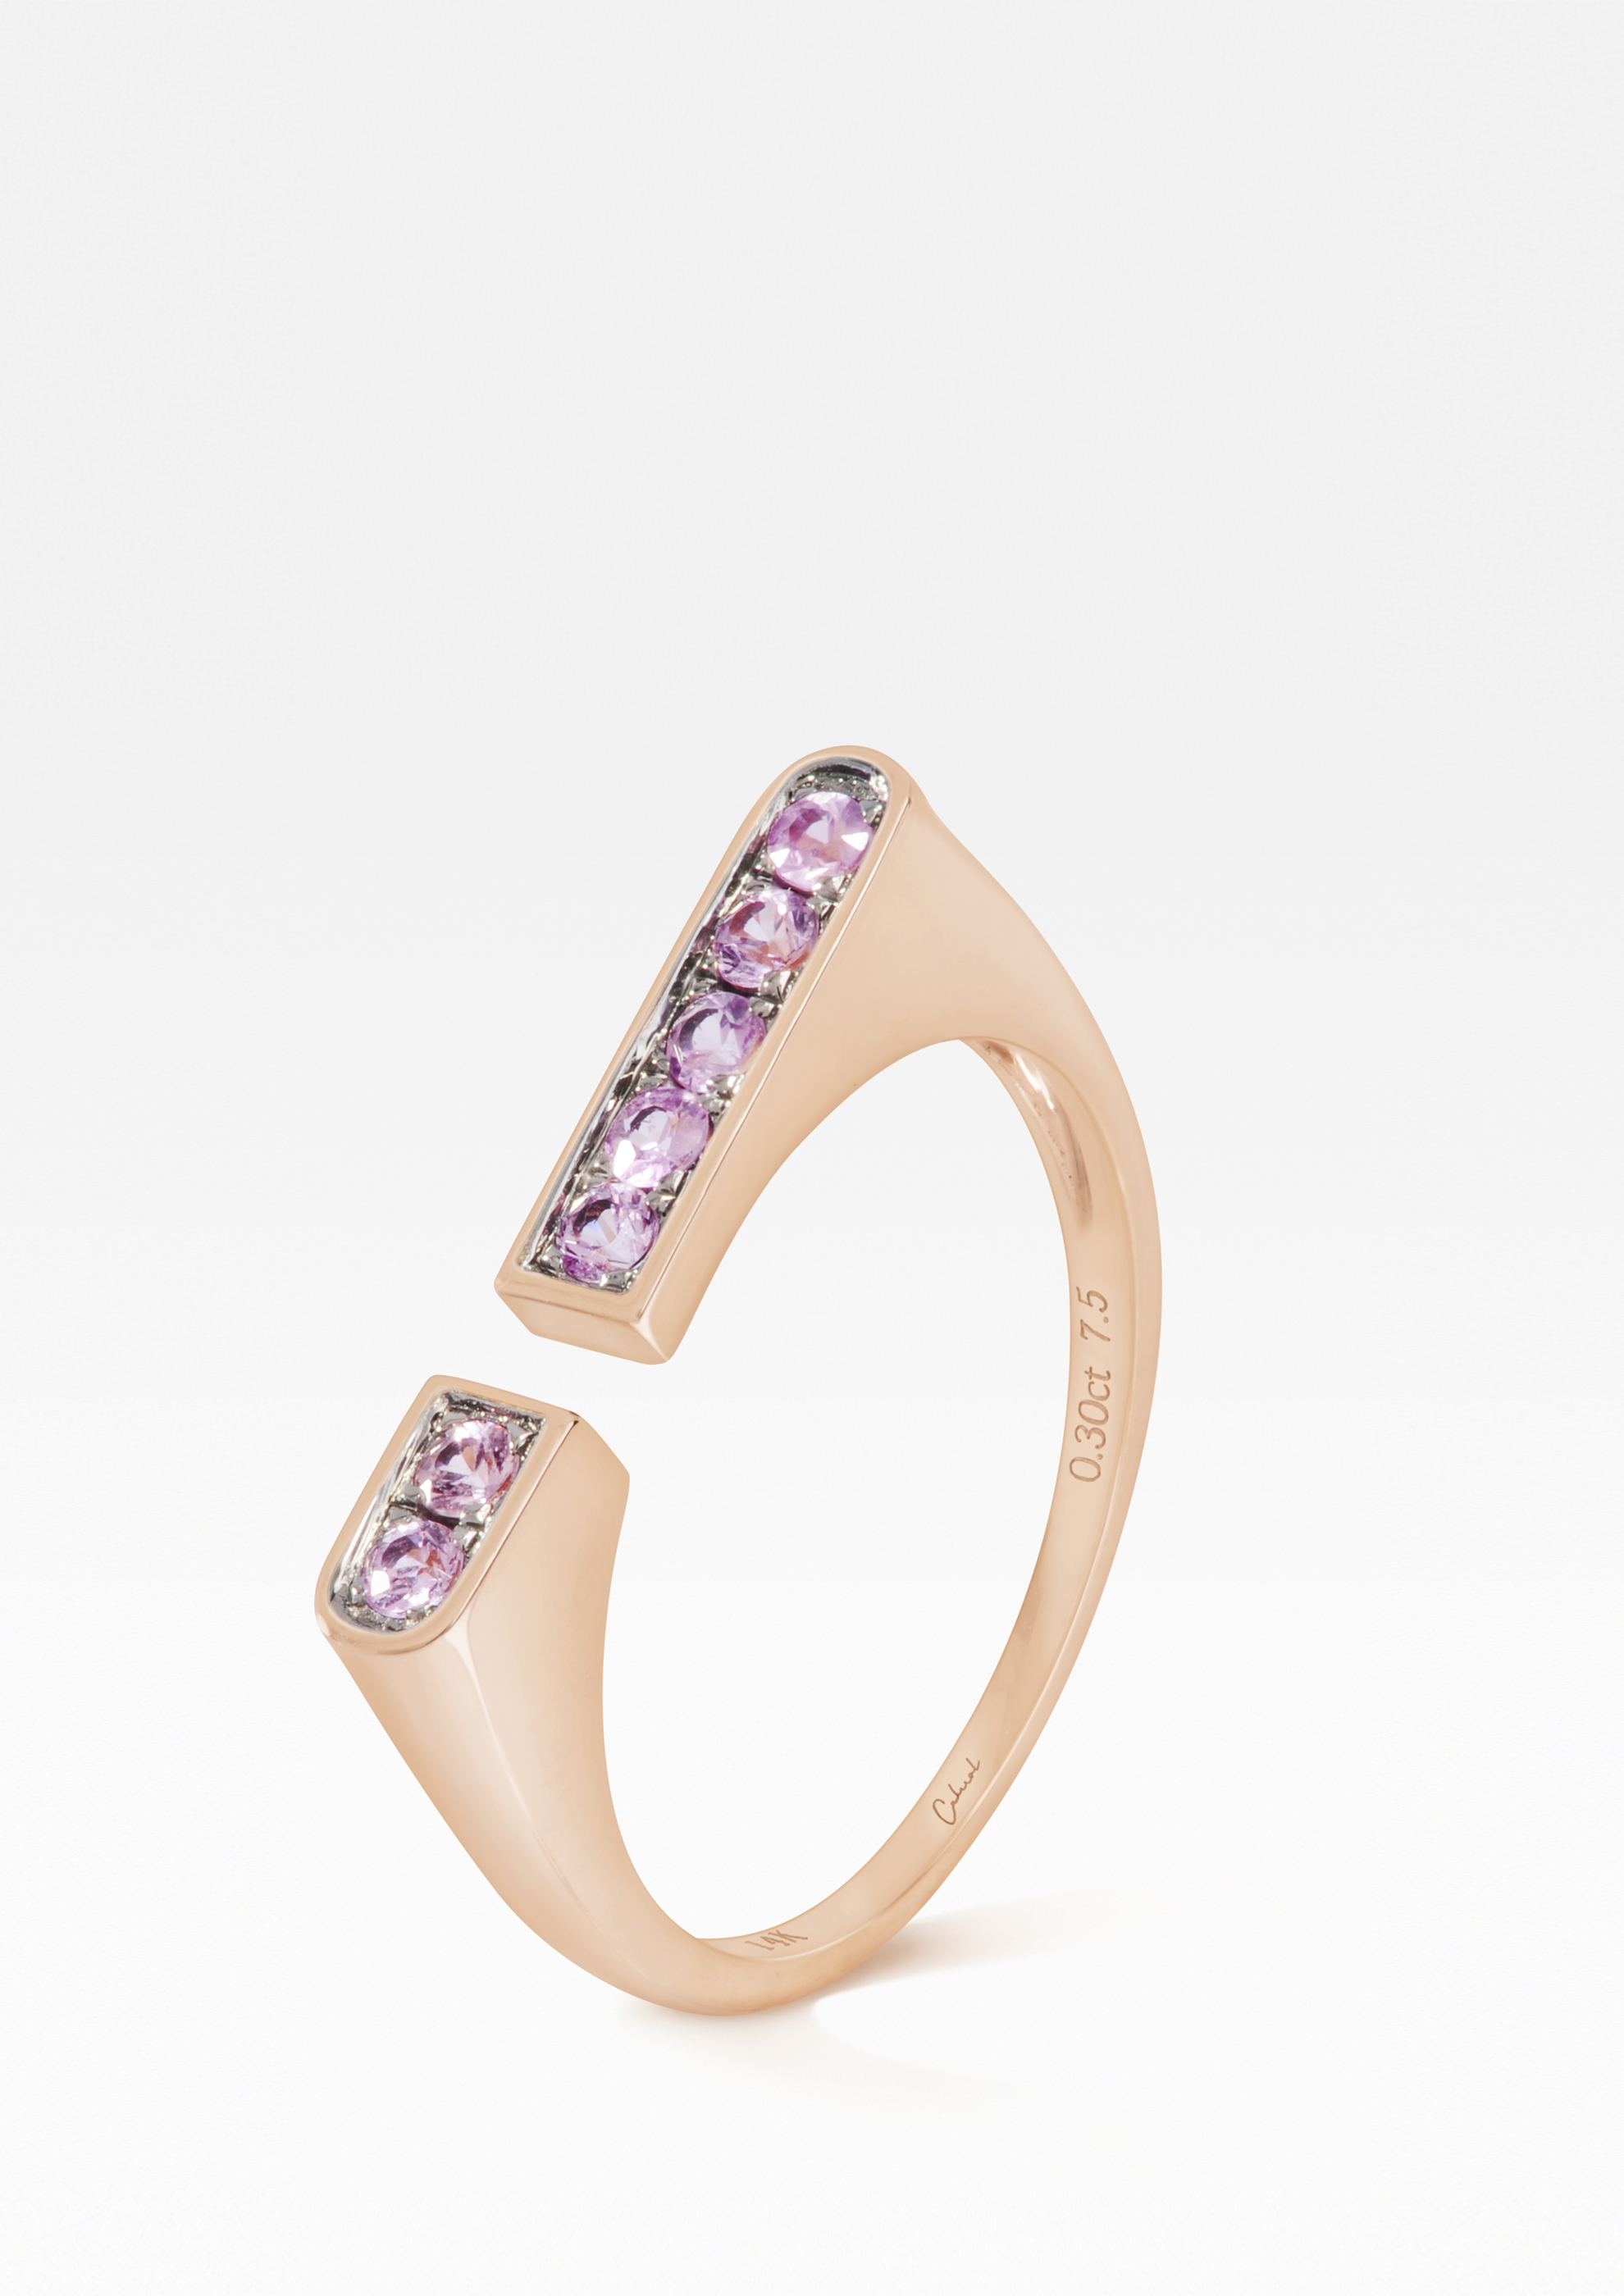 Cabirol_Joaillerie; Bague; Or; Rose; saphirs